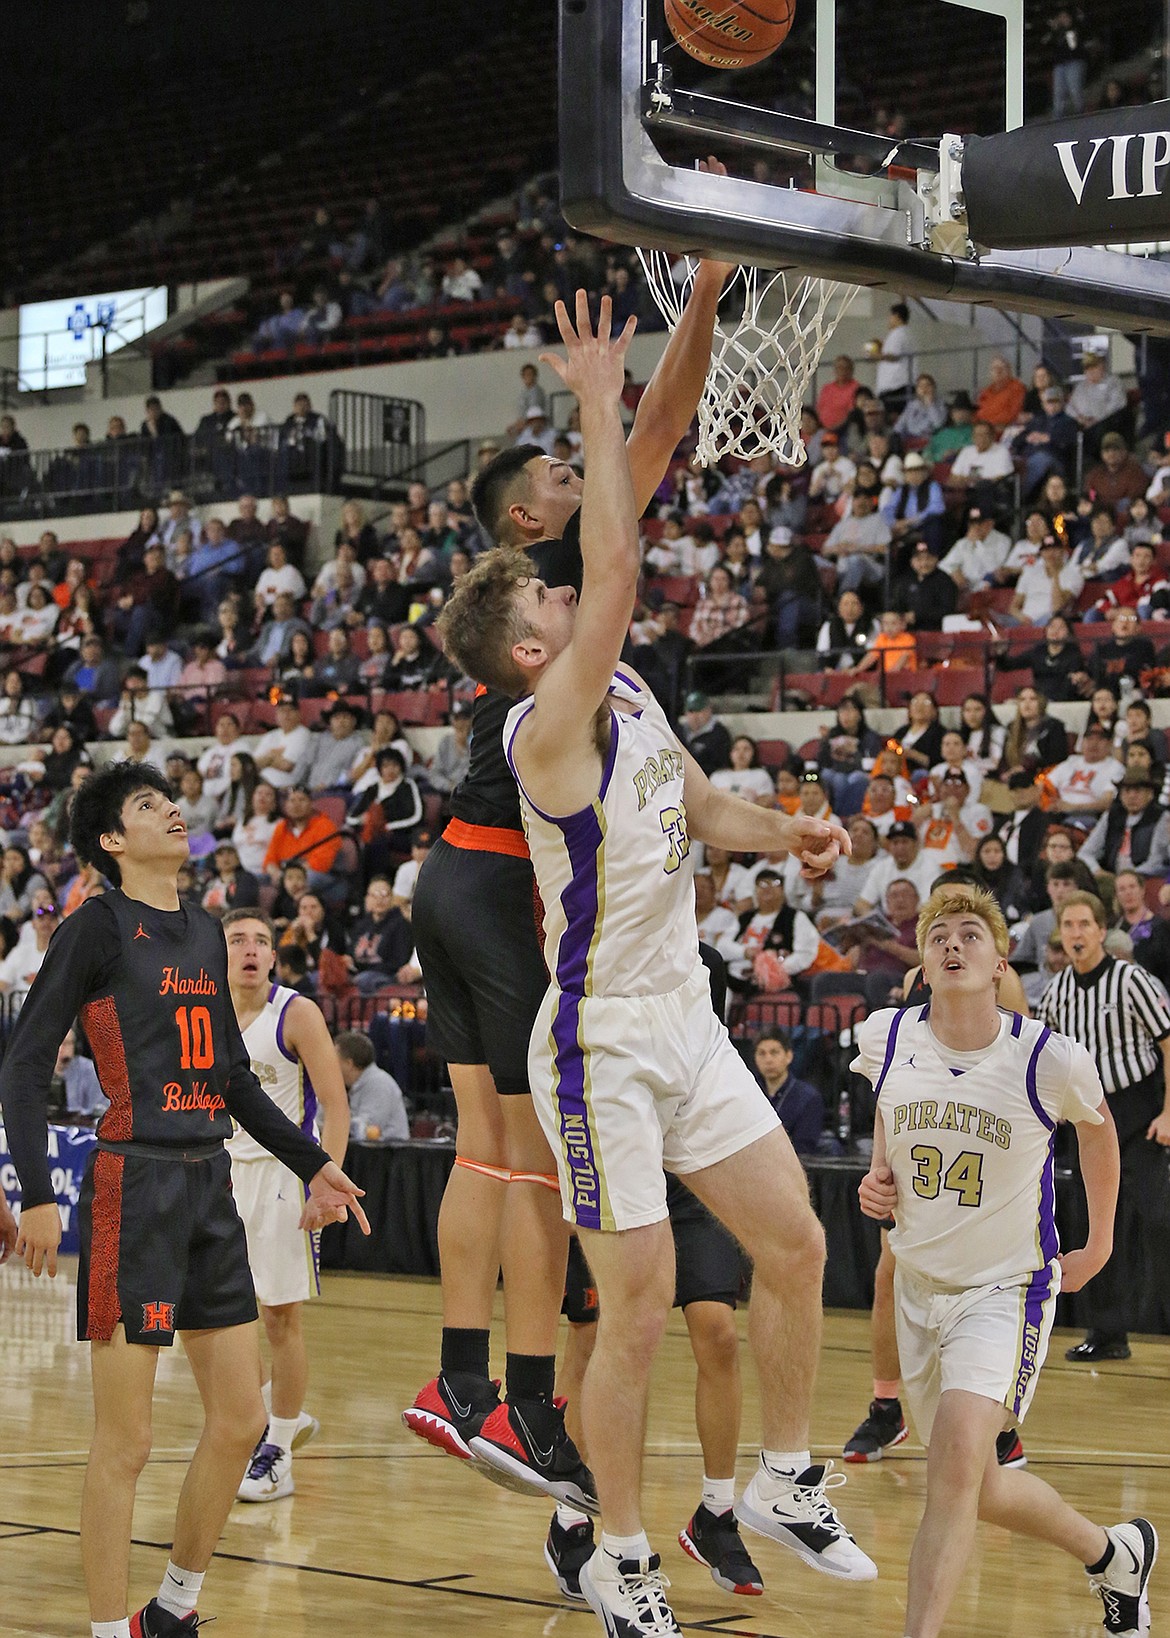 Polson Pirate Braunson Henriksen had scored 11 points in the opening round loss to Hardin at the State A Tournament in Billings Thursday morning. (Bob Gunderson photo)